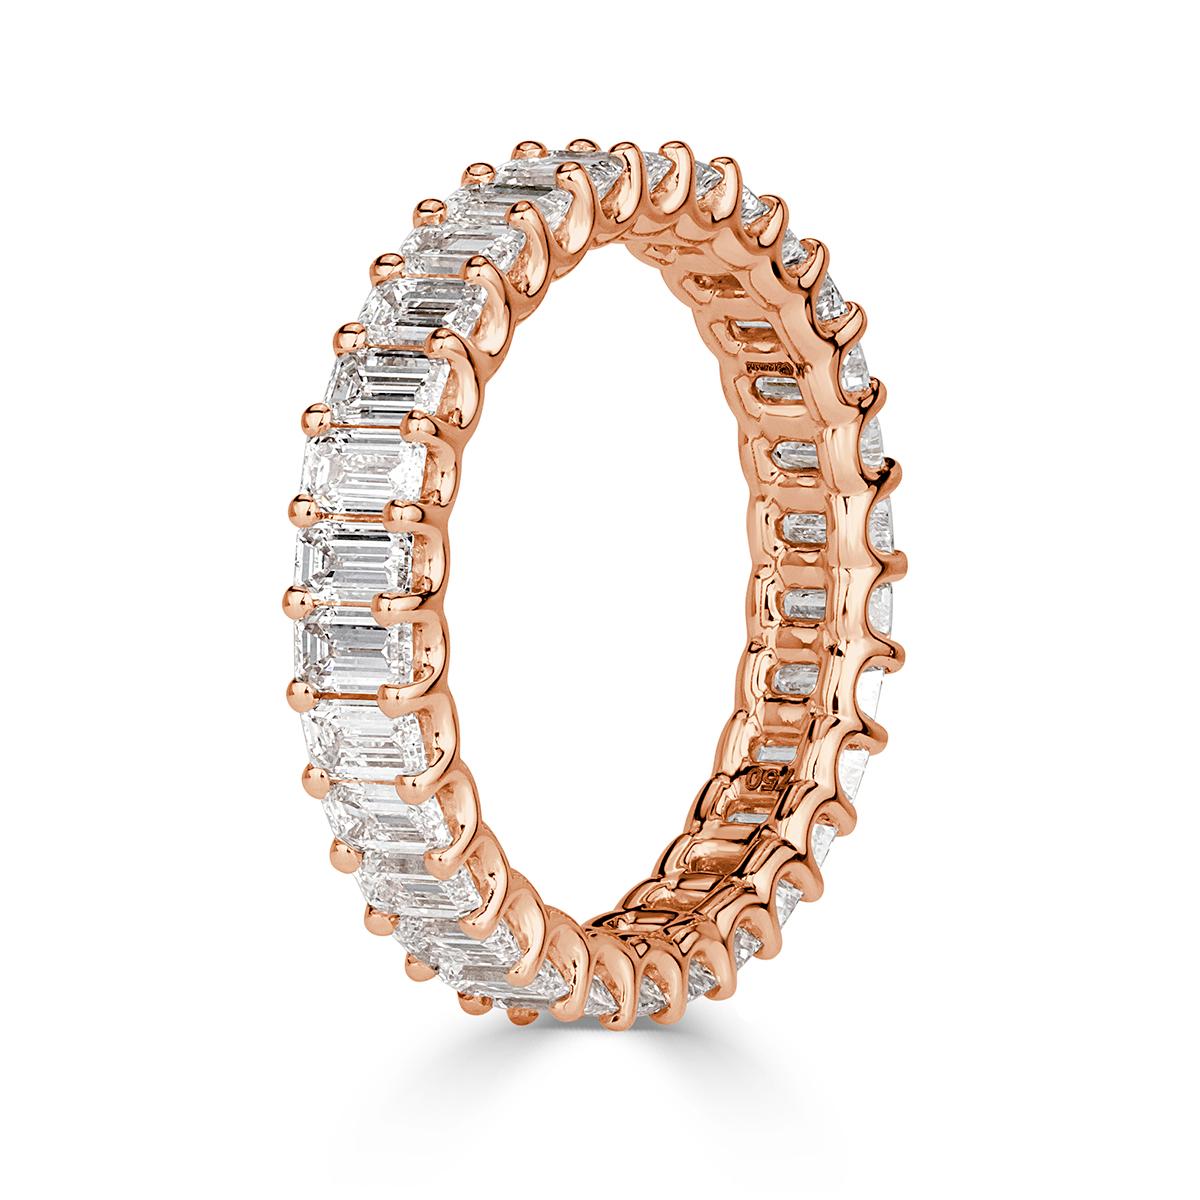 This ravishing diamond eternity band showcases 2.66ct of perefctly matched emerald cut diamonds graded at E-F, VVS2-VS1. They are incredibly white and clear, each hand set in a custom 18k rose gold, 